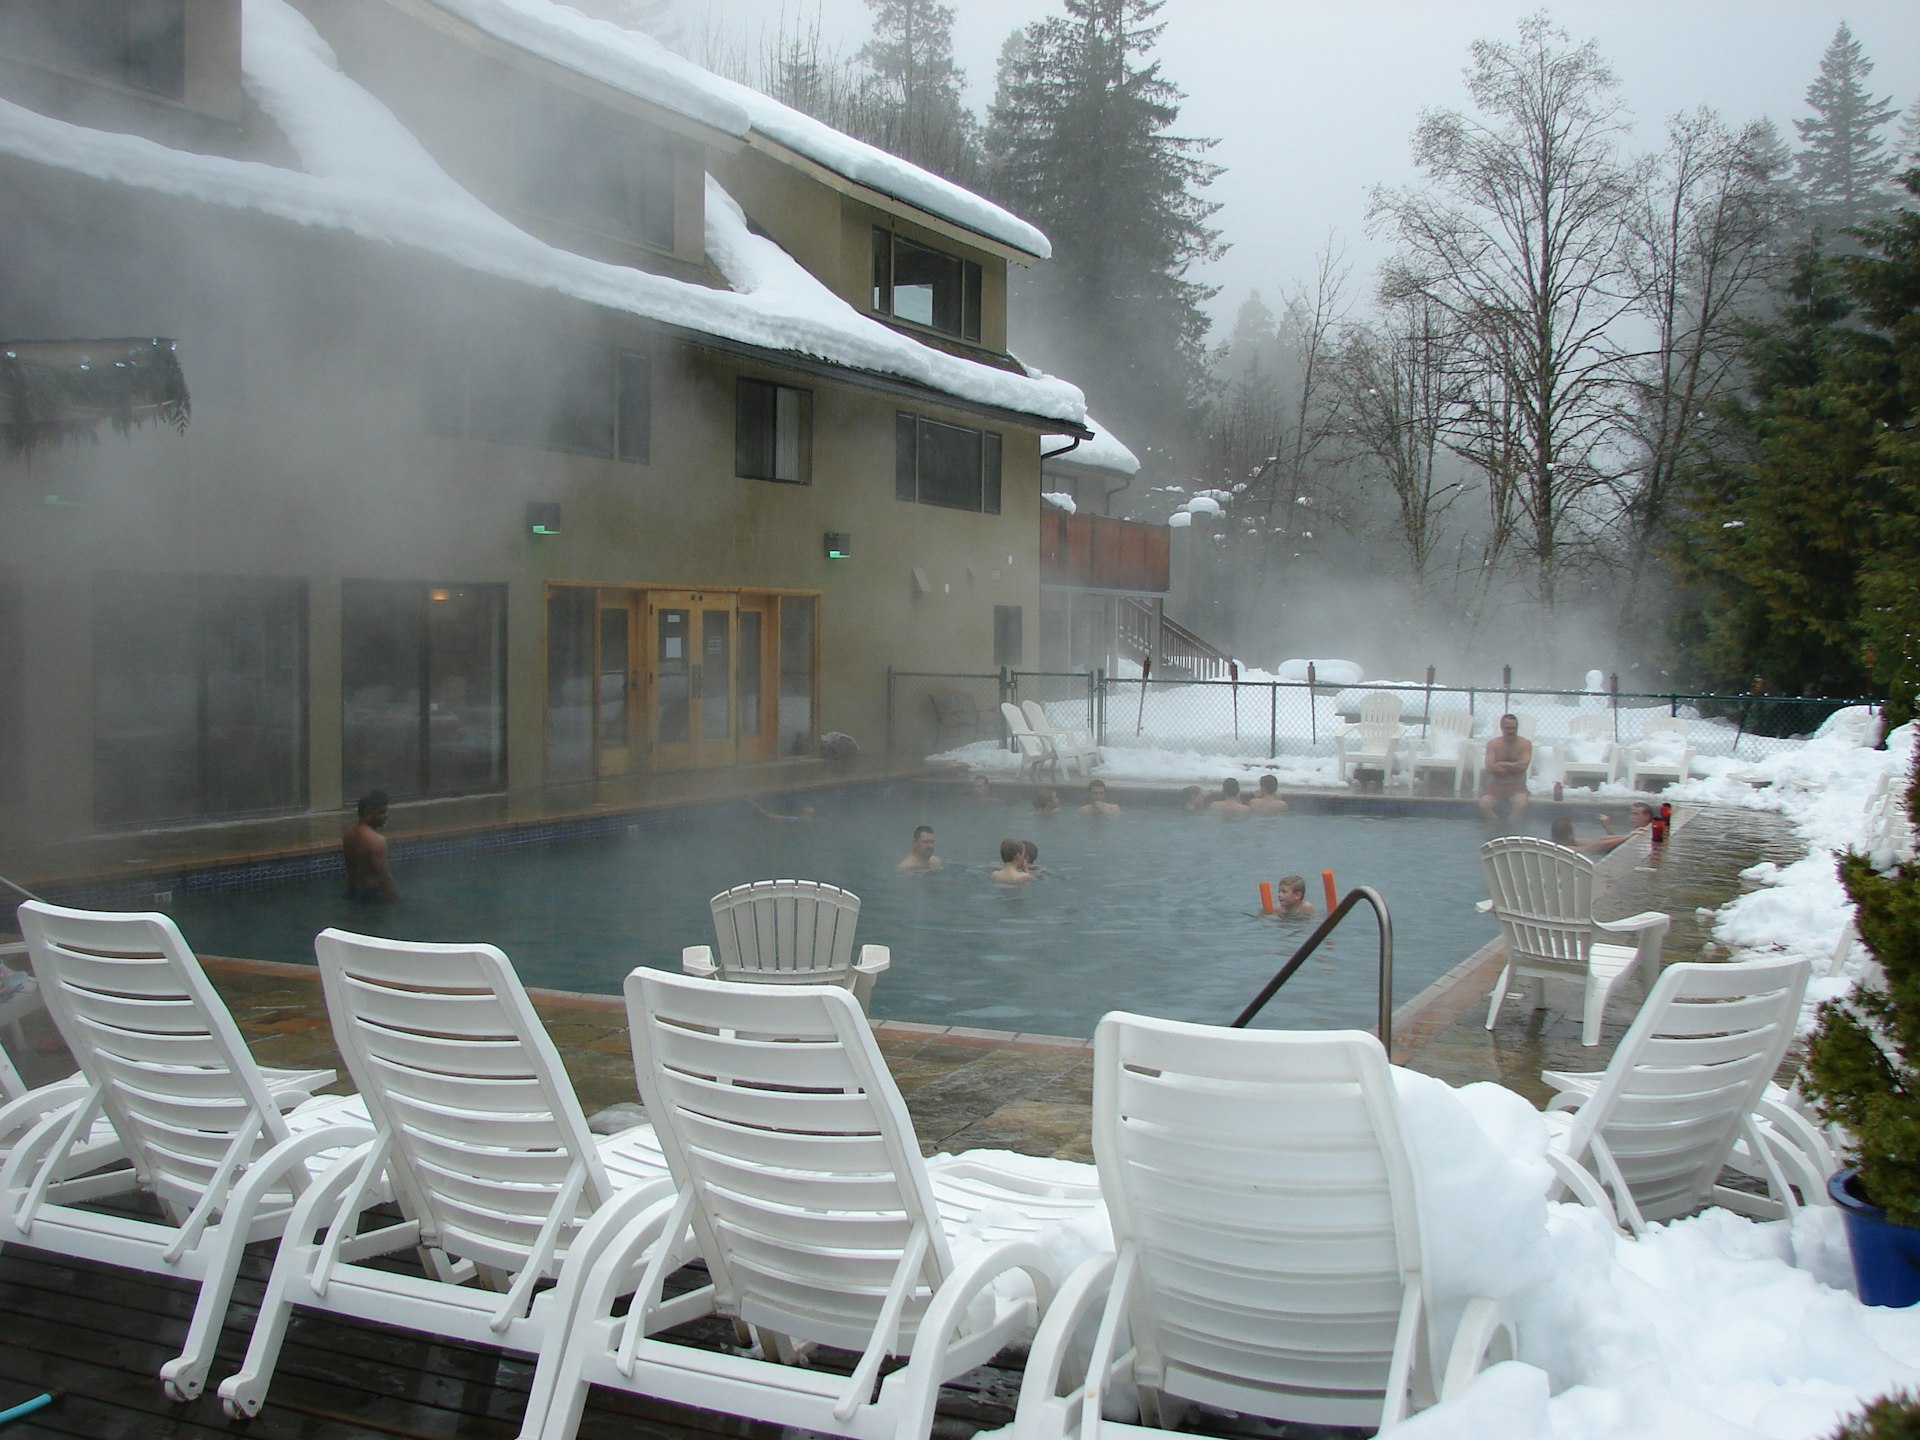 Steam rises from an outdoor thermal pool 